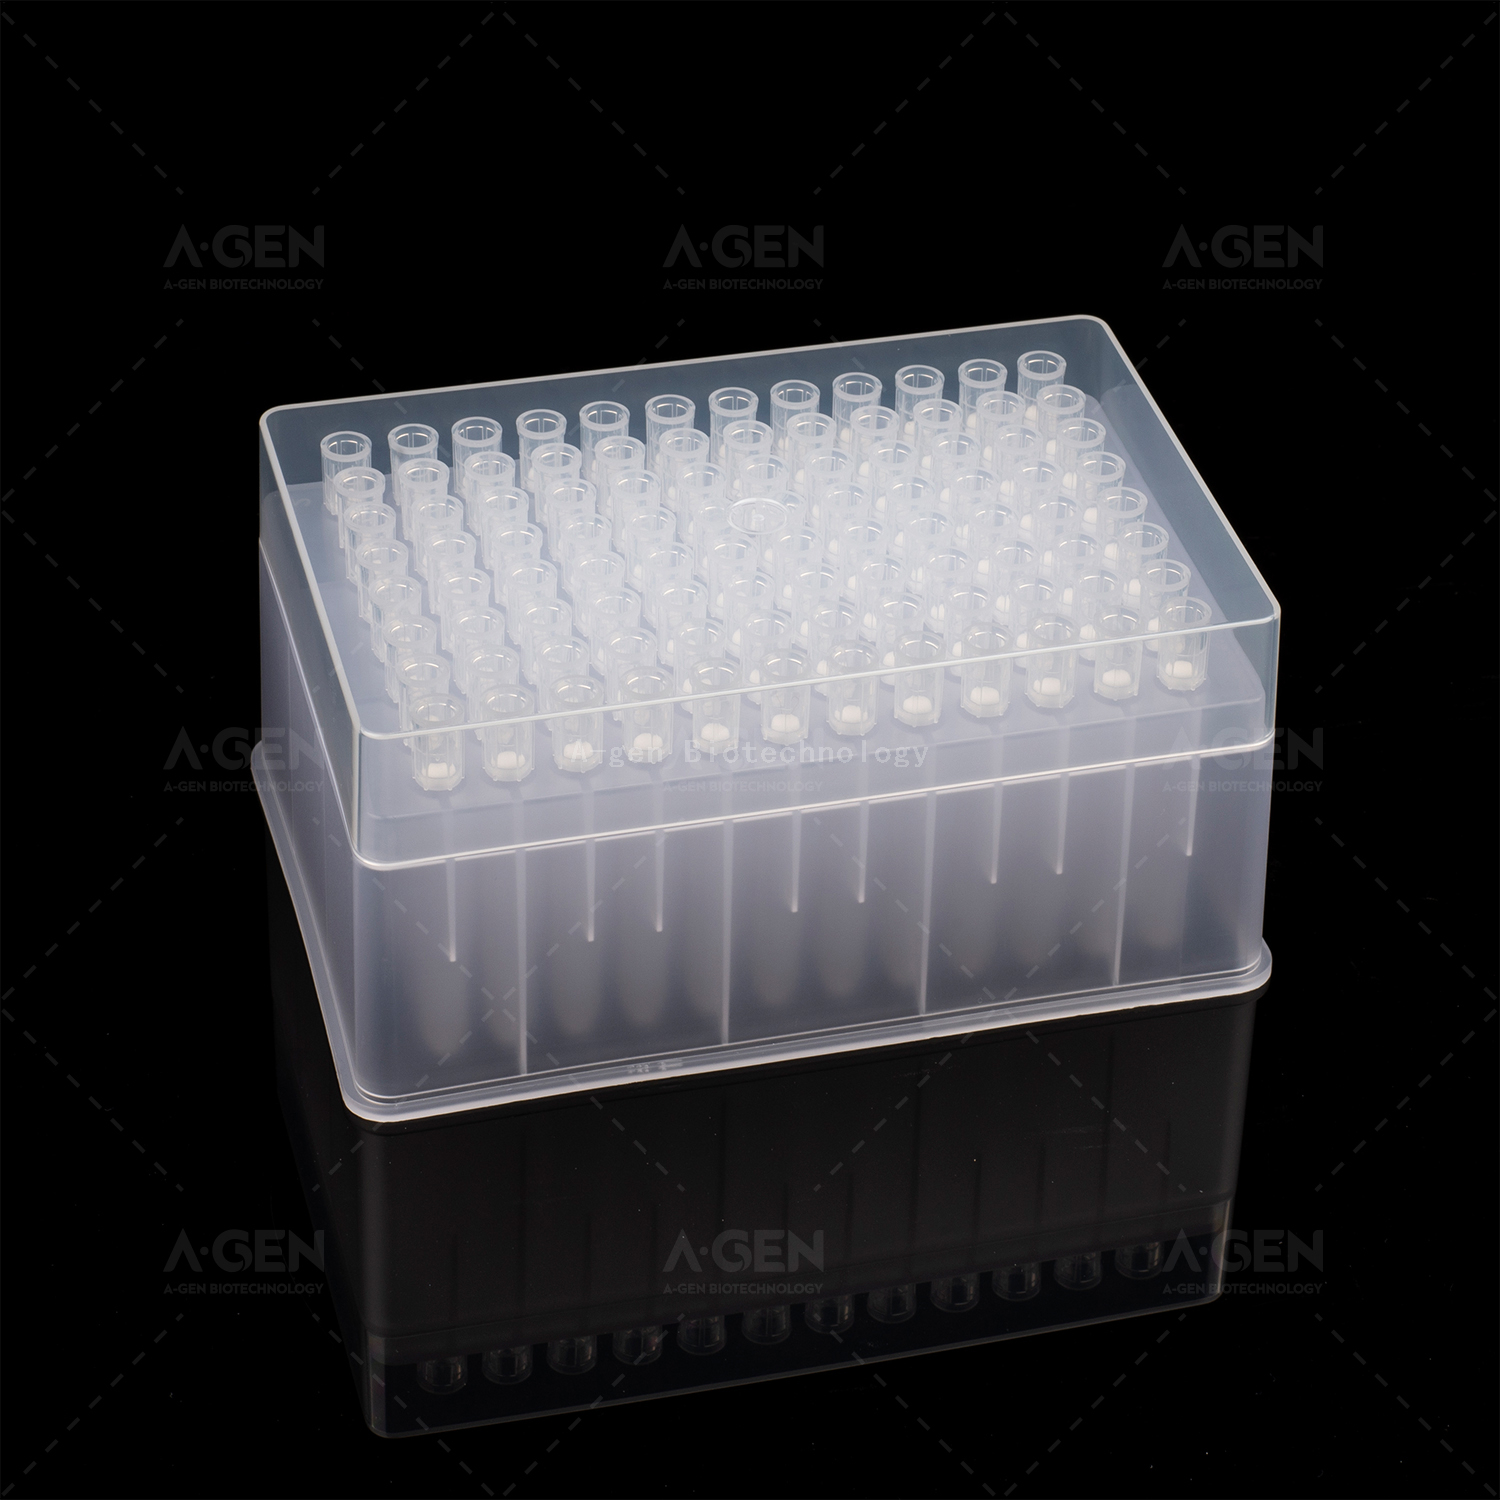 BECKMAN 50μL Clear Robotic PP Pipette Tip (Racked,sterilized) for DNA/RNA Extraction with Filter FXF-50-RS